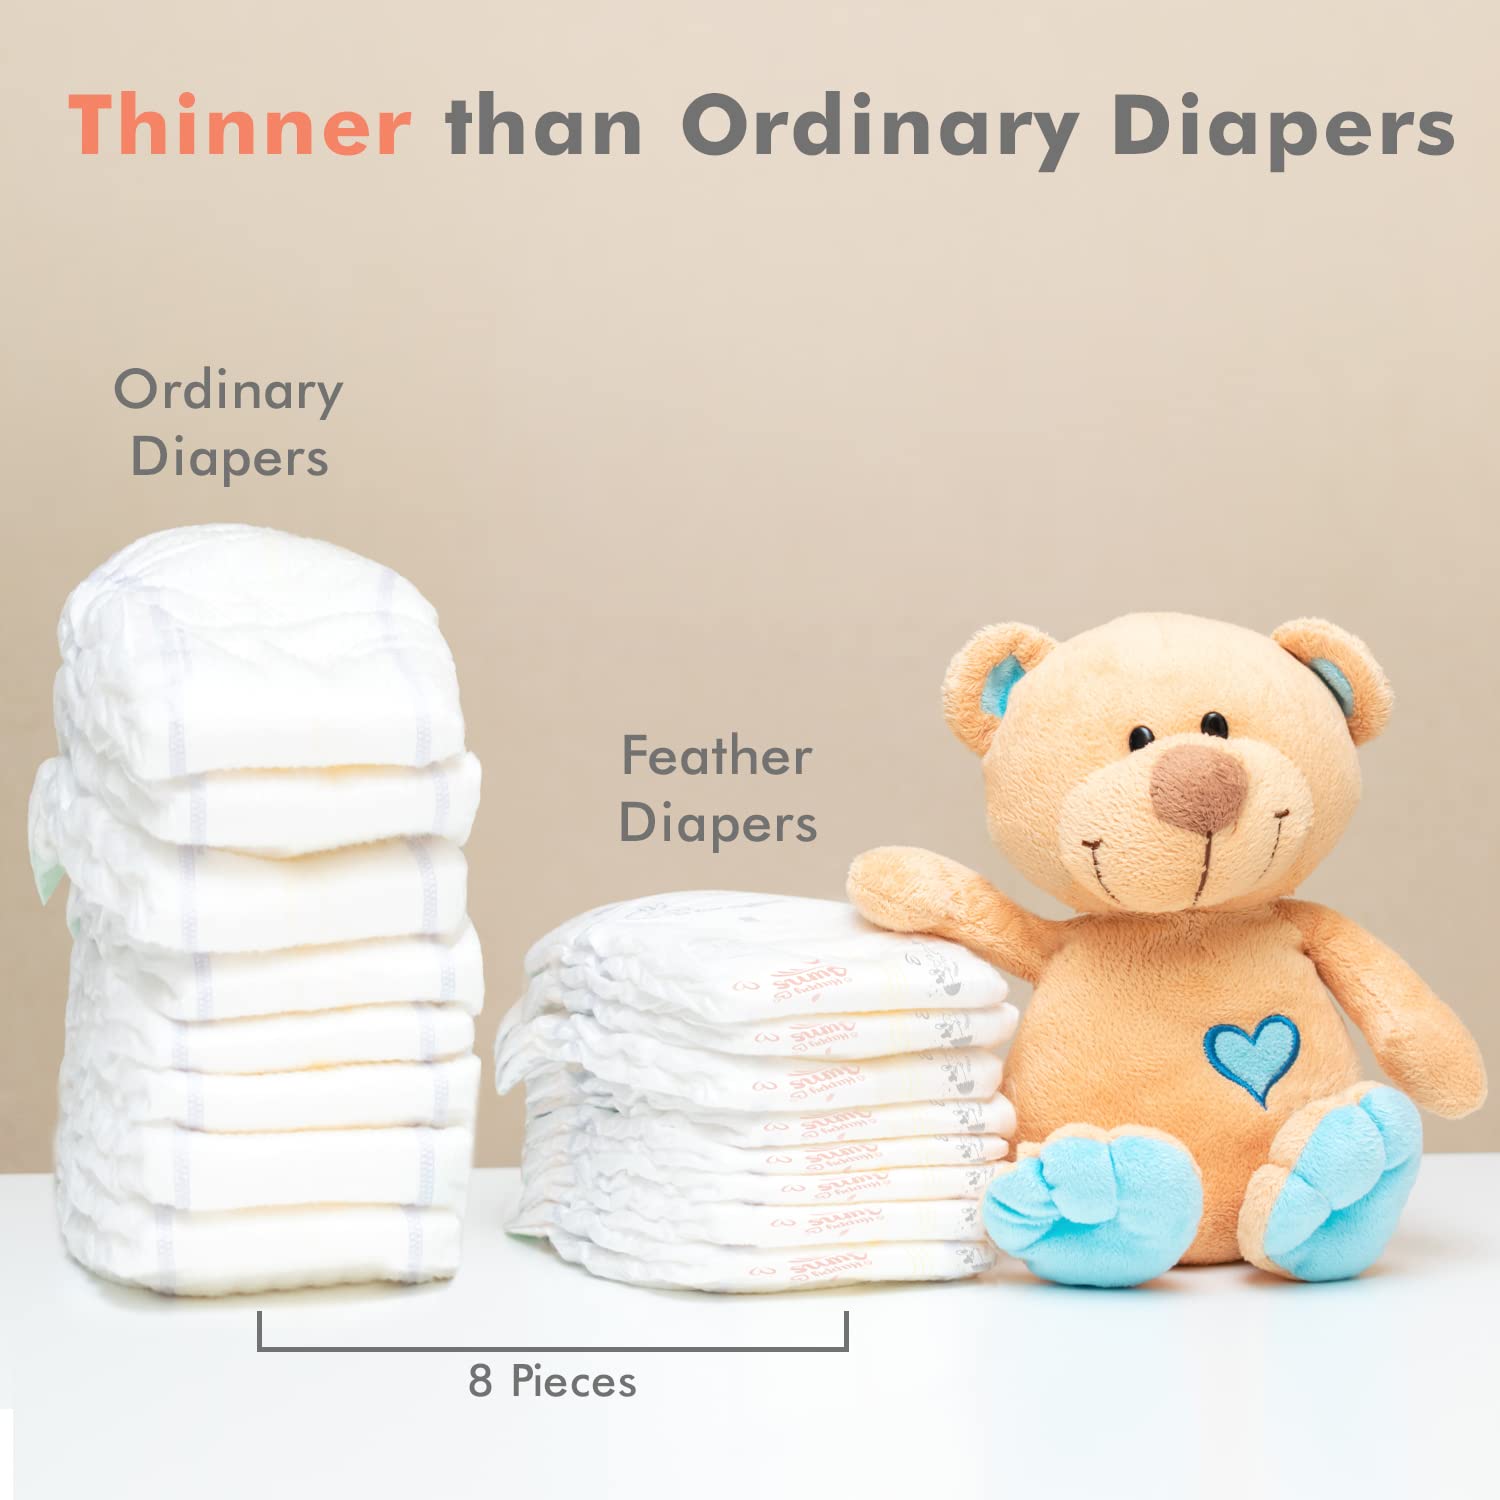 R for Rabbit Feather Diapers For Your Baby - Large (9-14kgs)